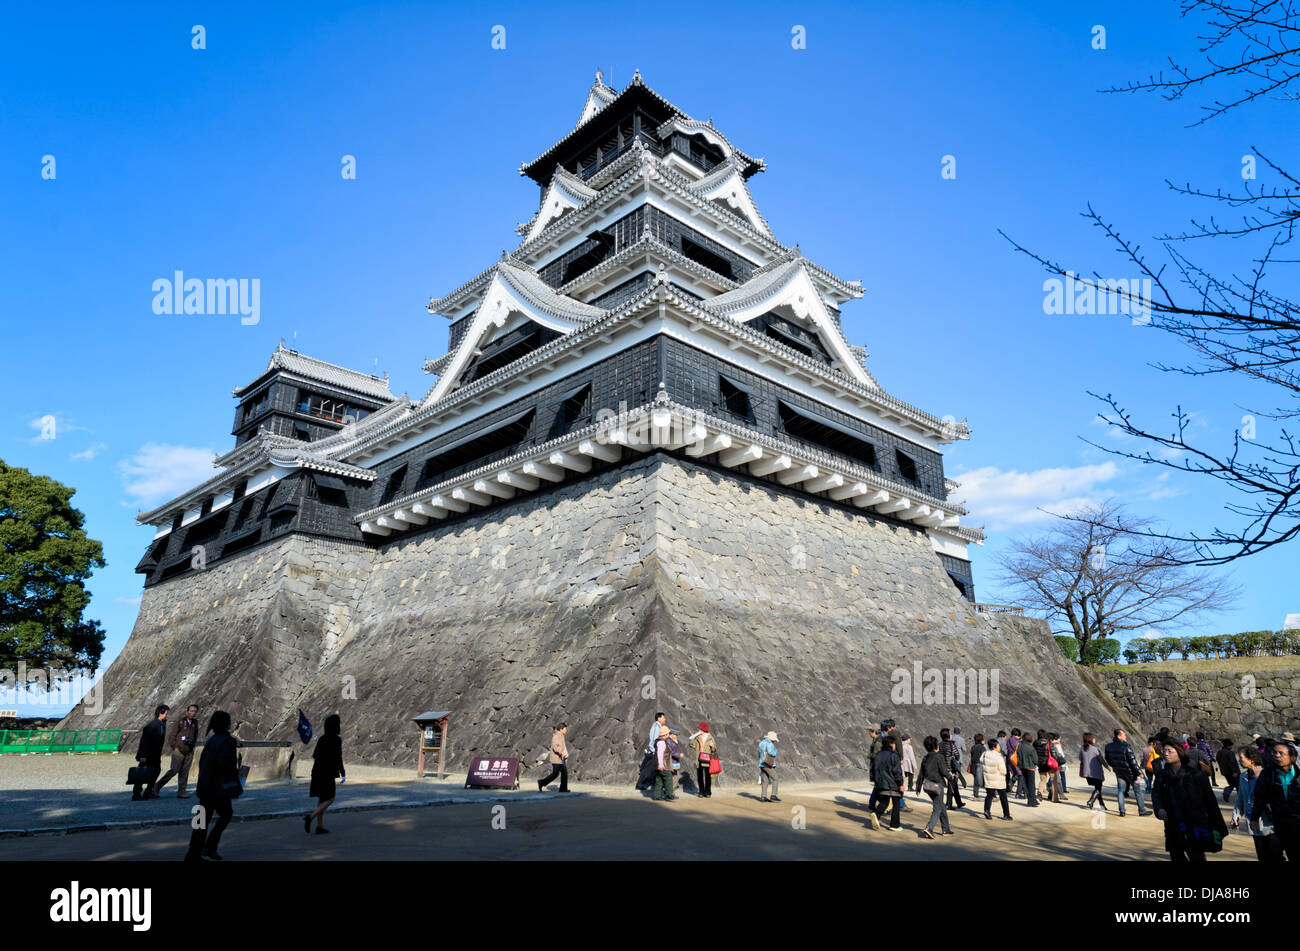 Defenses from the samurai era of Japan: A grand, imposing Japanese castle with very strong, impenetrable walls Stock Photo